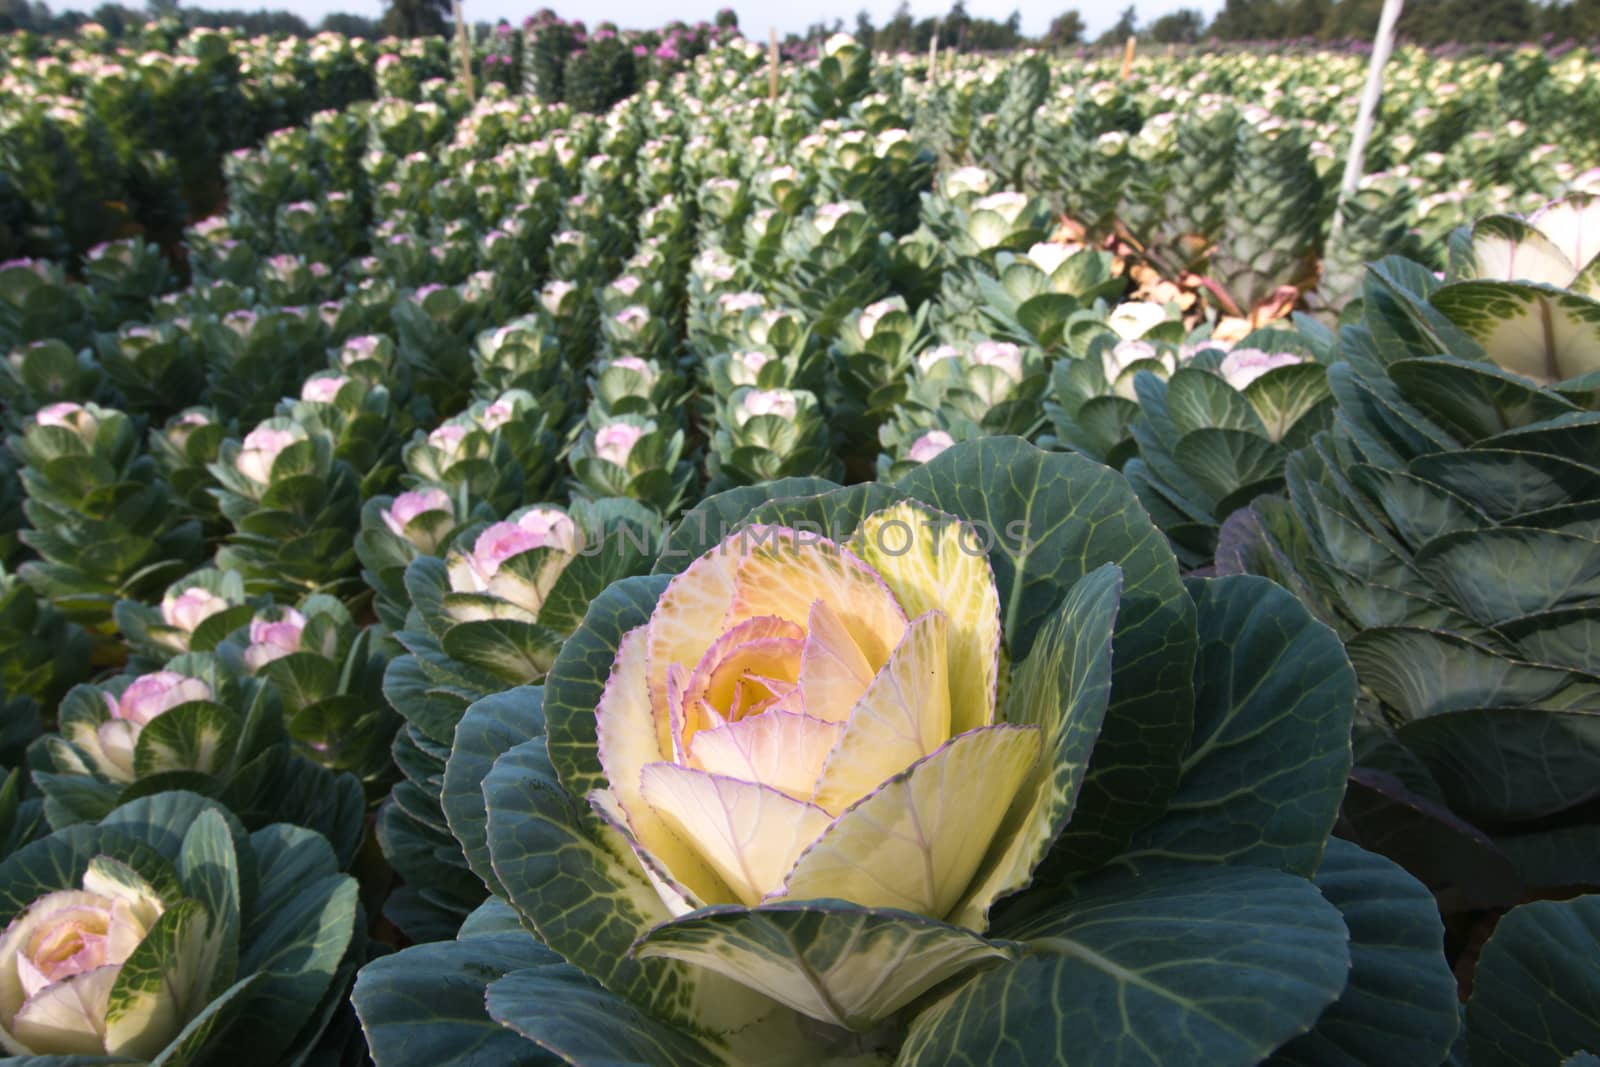 Closeup of cabbage flower